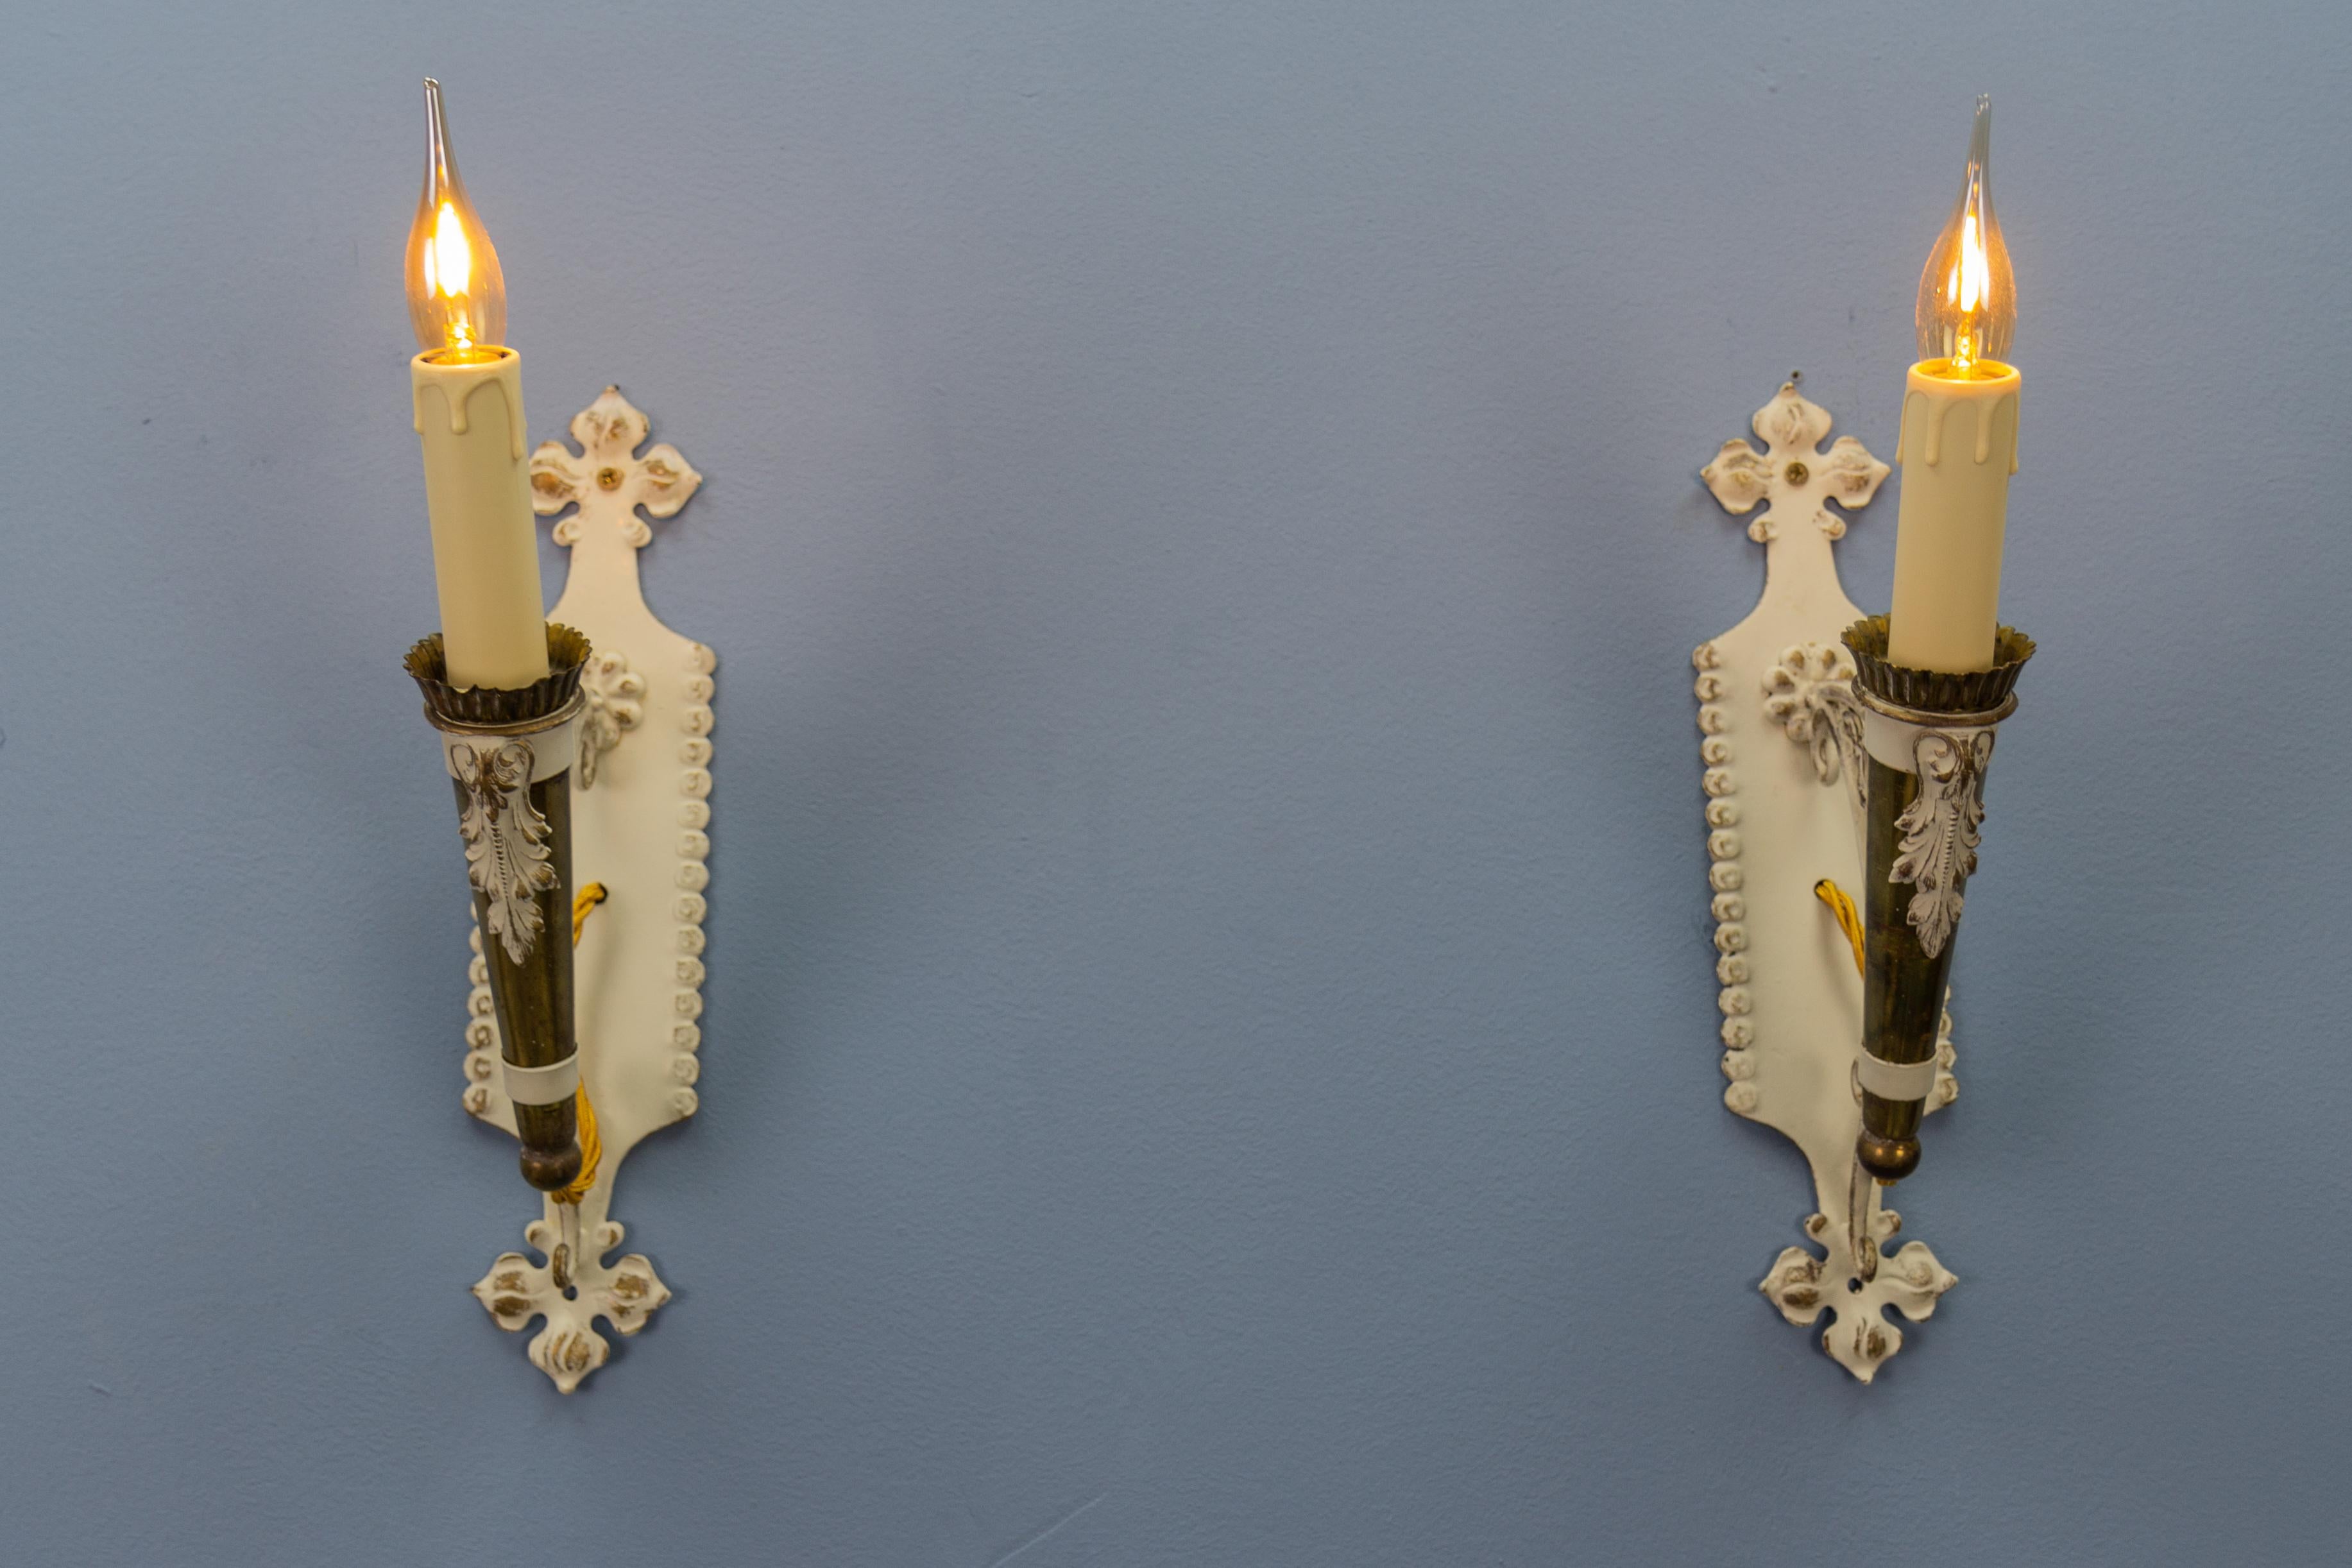 Regency Pair of Italian Vintage White and Golden Metal Torch Shaped Wall Sconces, 1950s For Sale